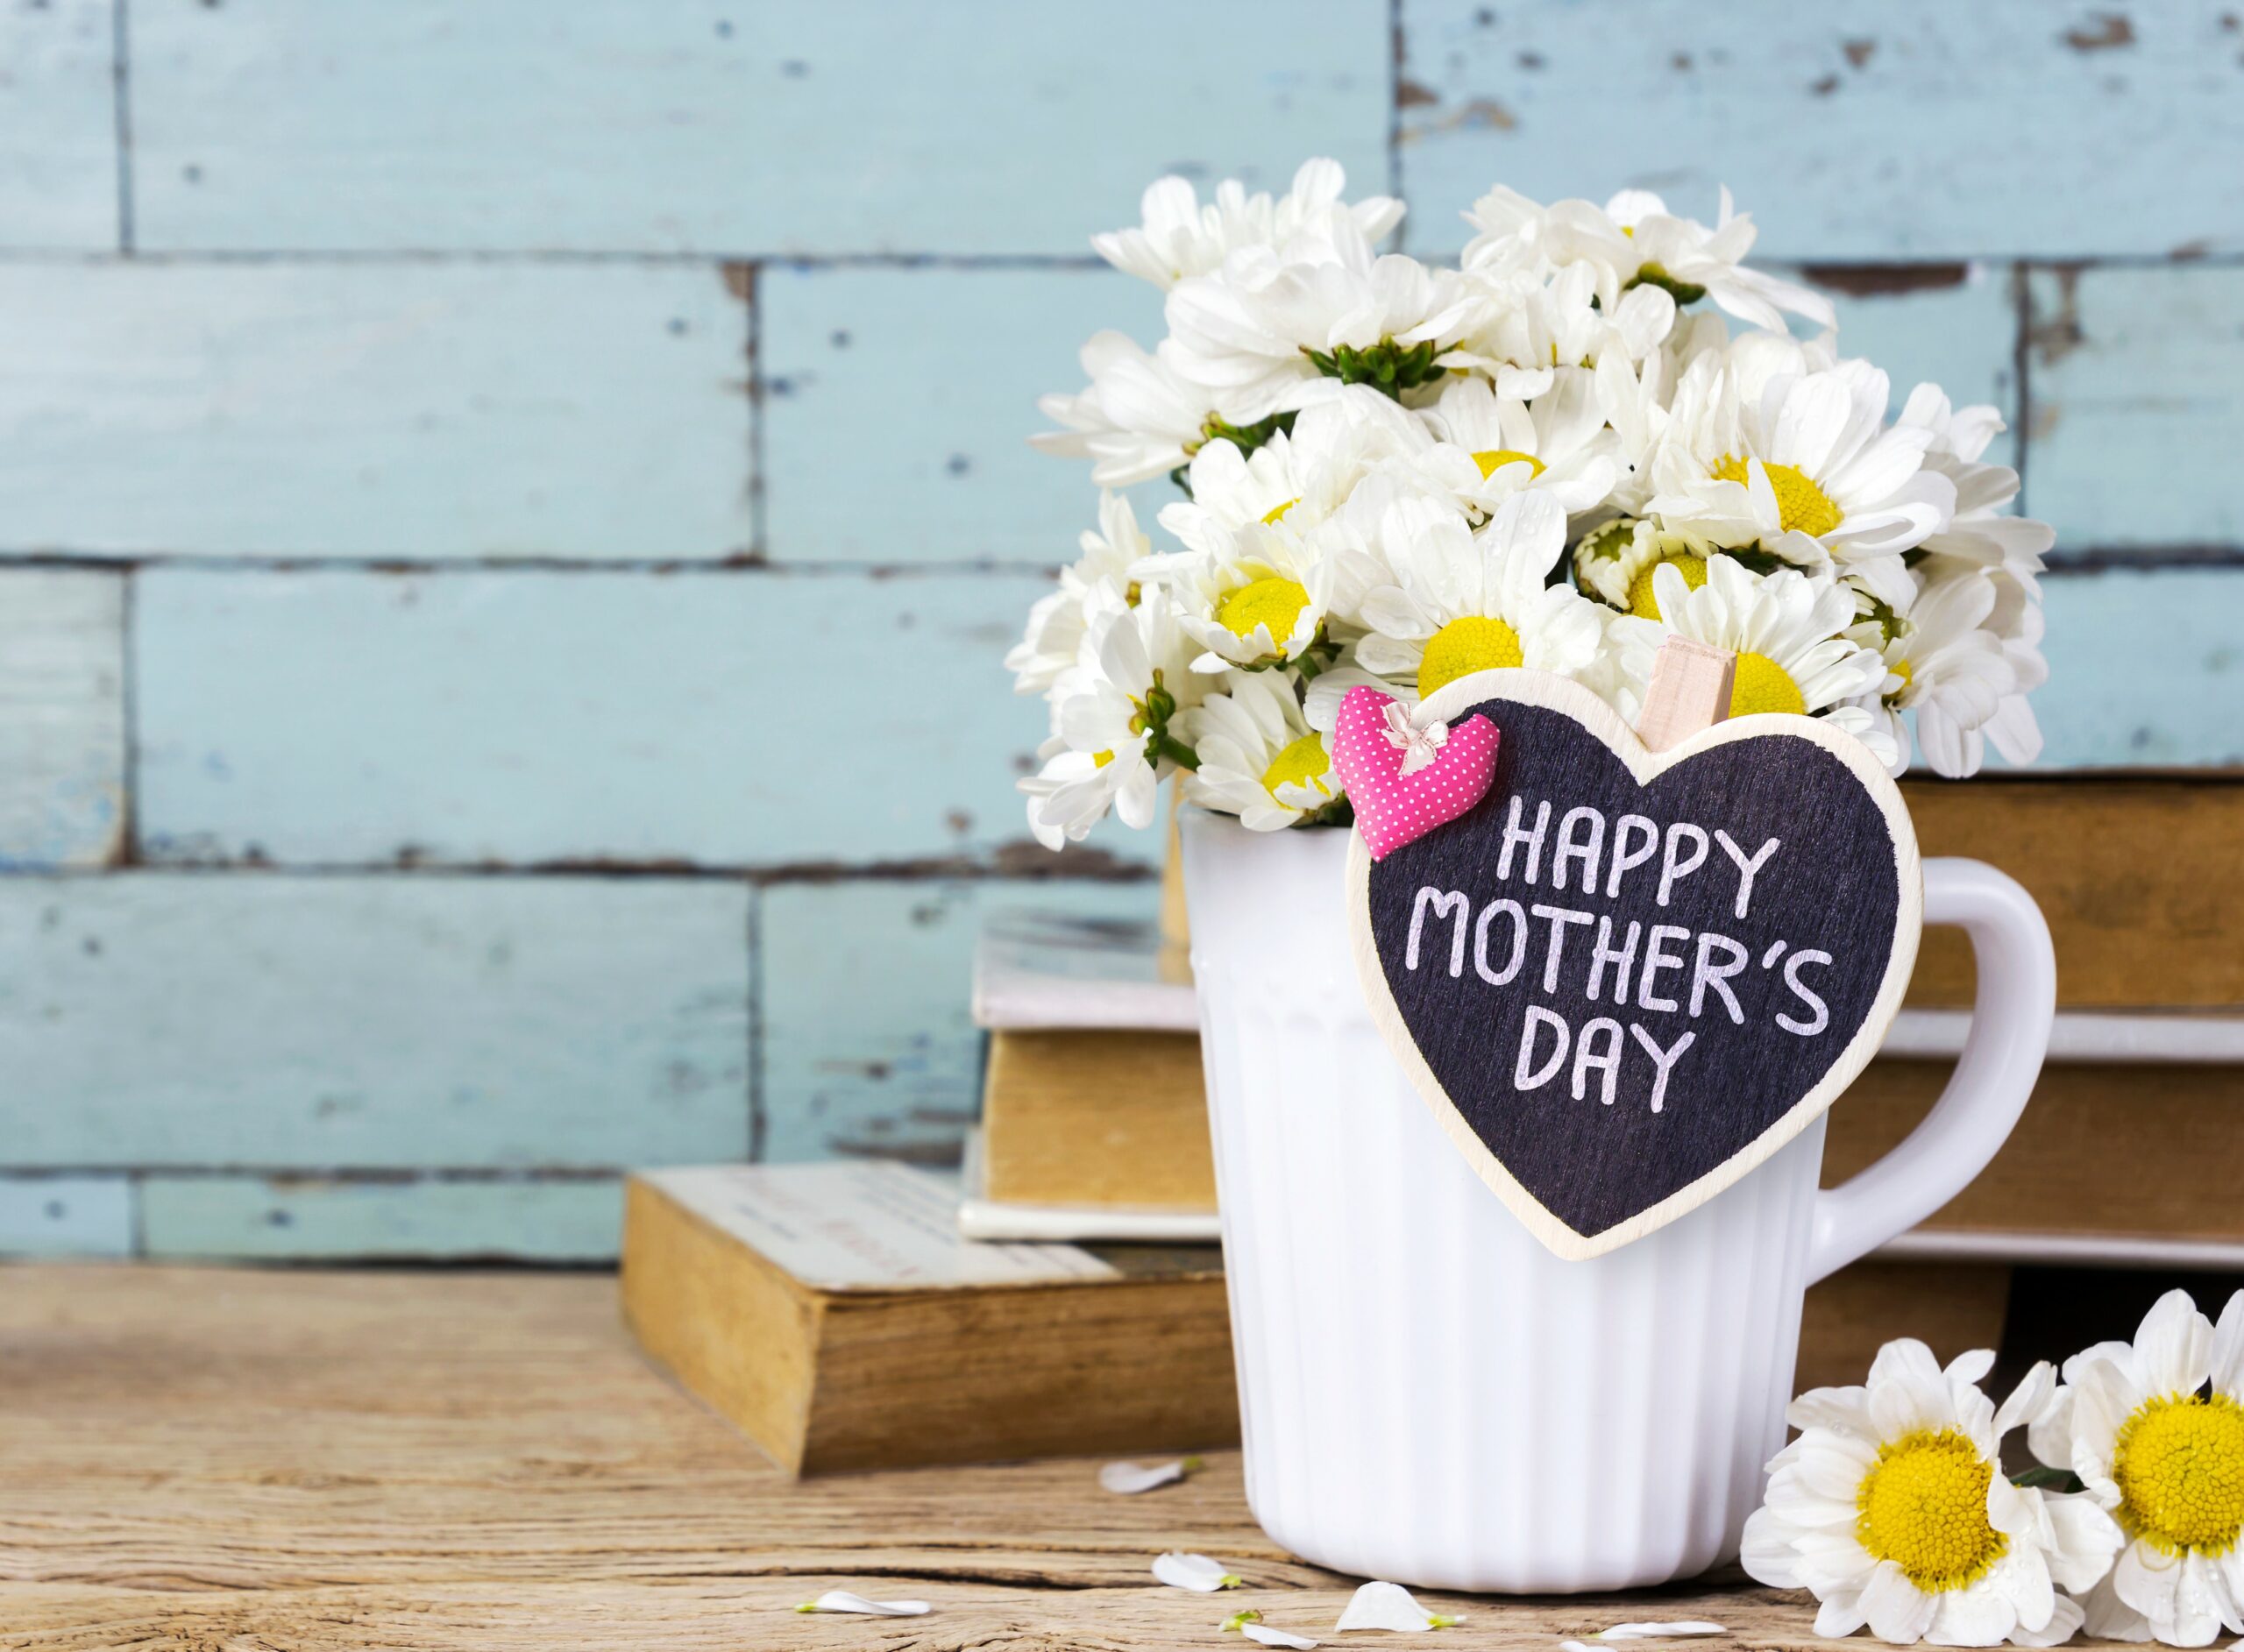 VASE WITH FLOWERS AND SIGN WISHING HAPPY MOTHERS DAY